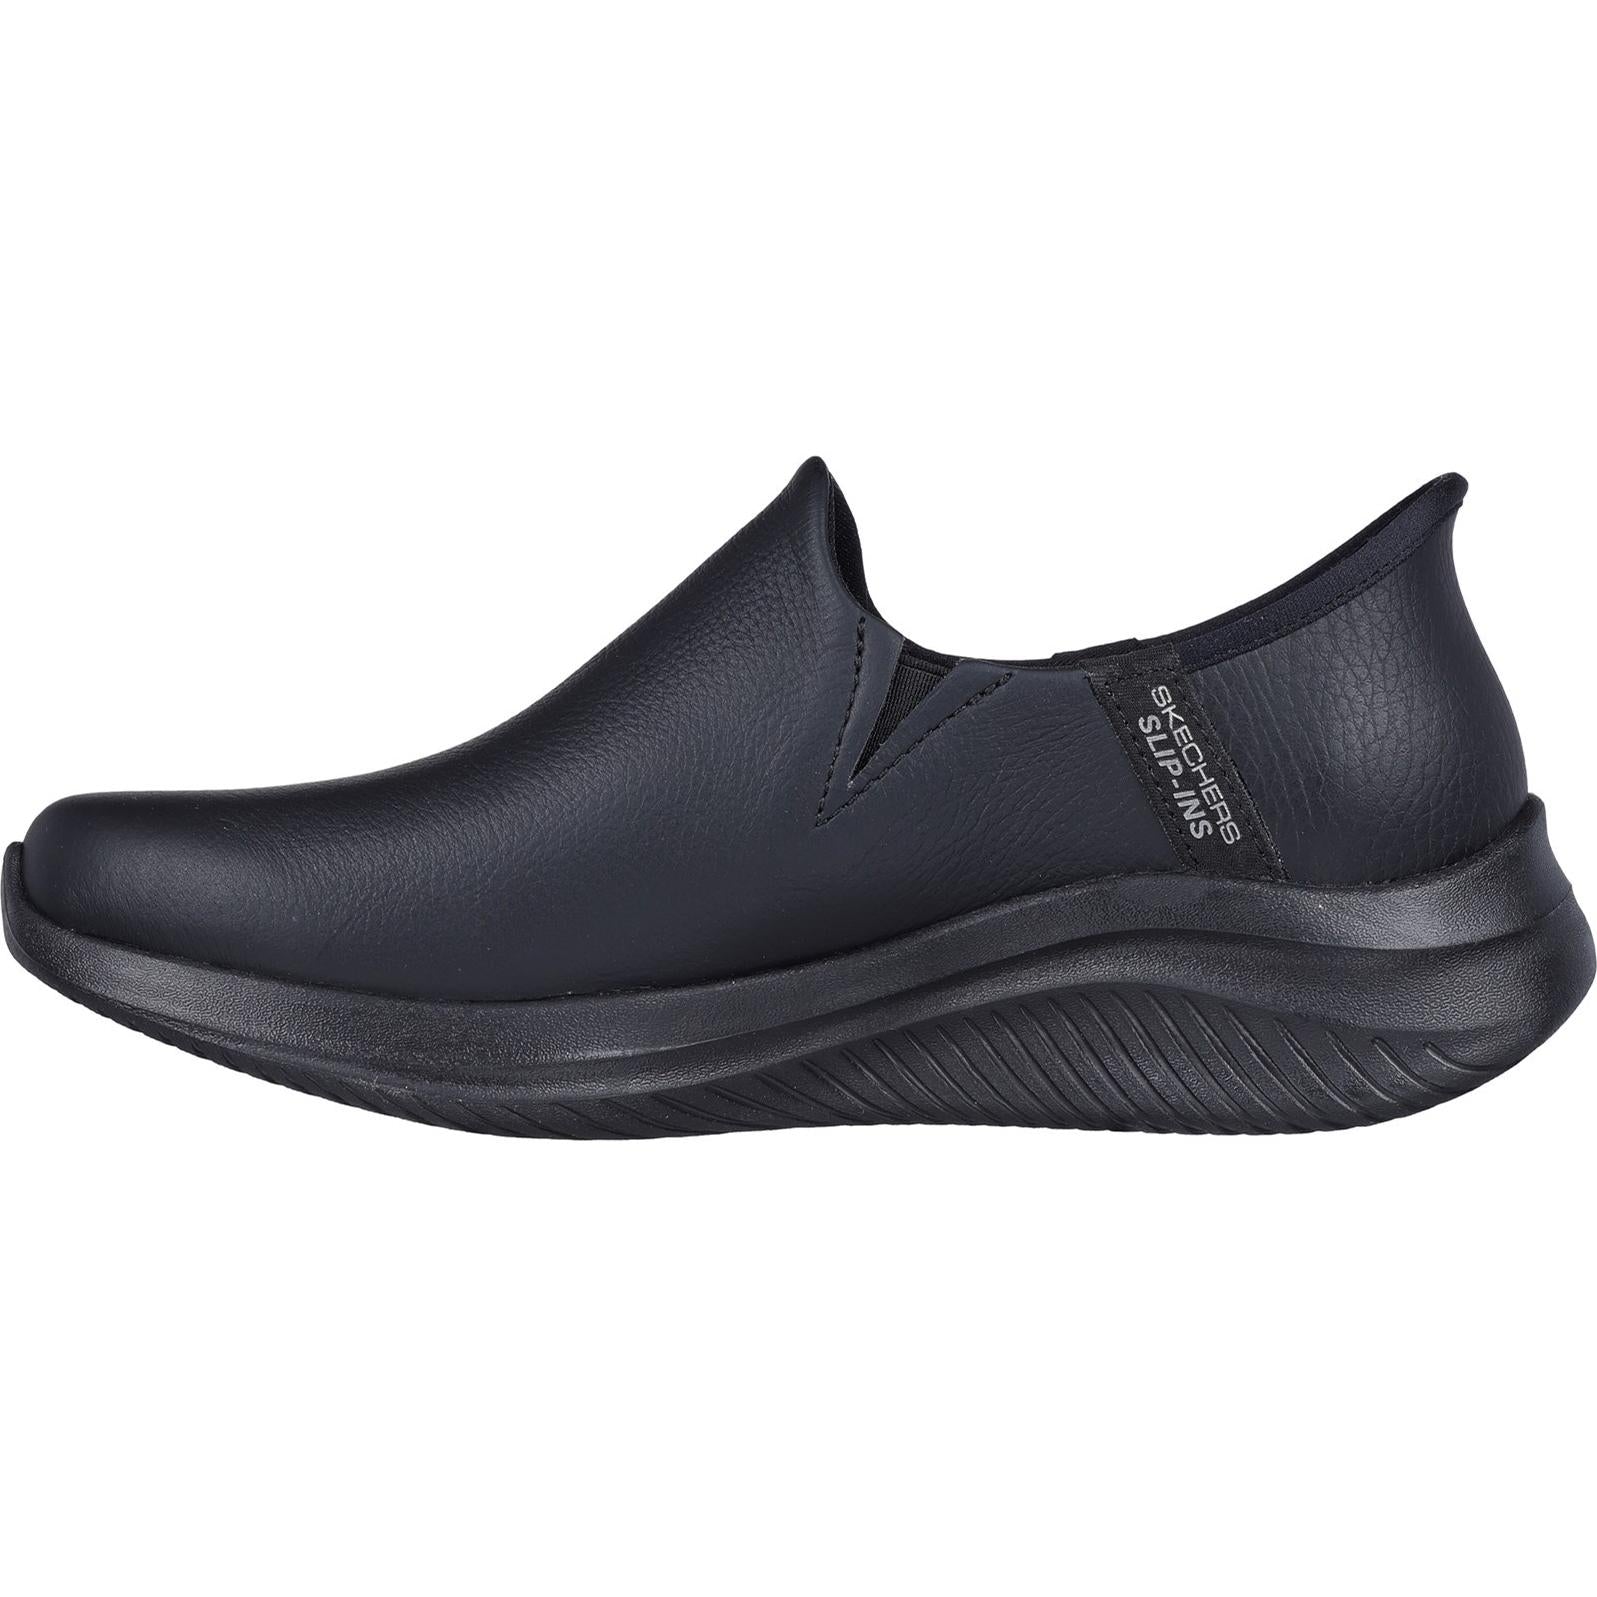 Skechers Ultra Flex 3.0 All Smooth Shoes